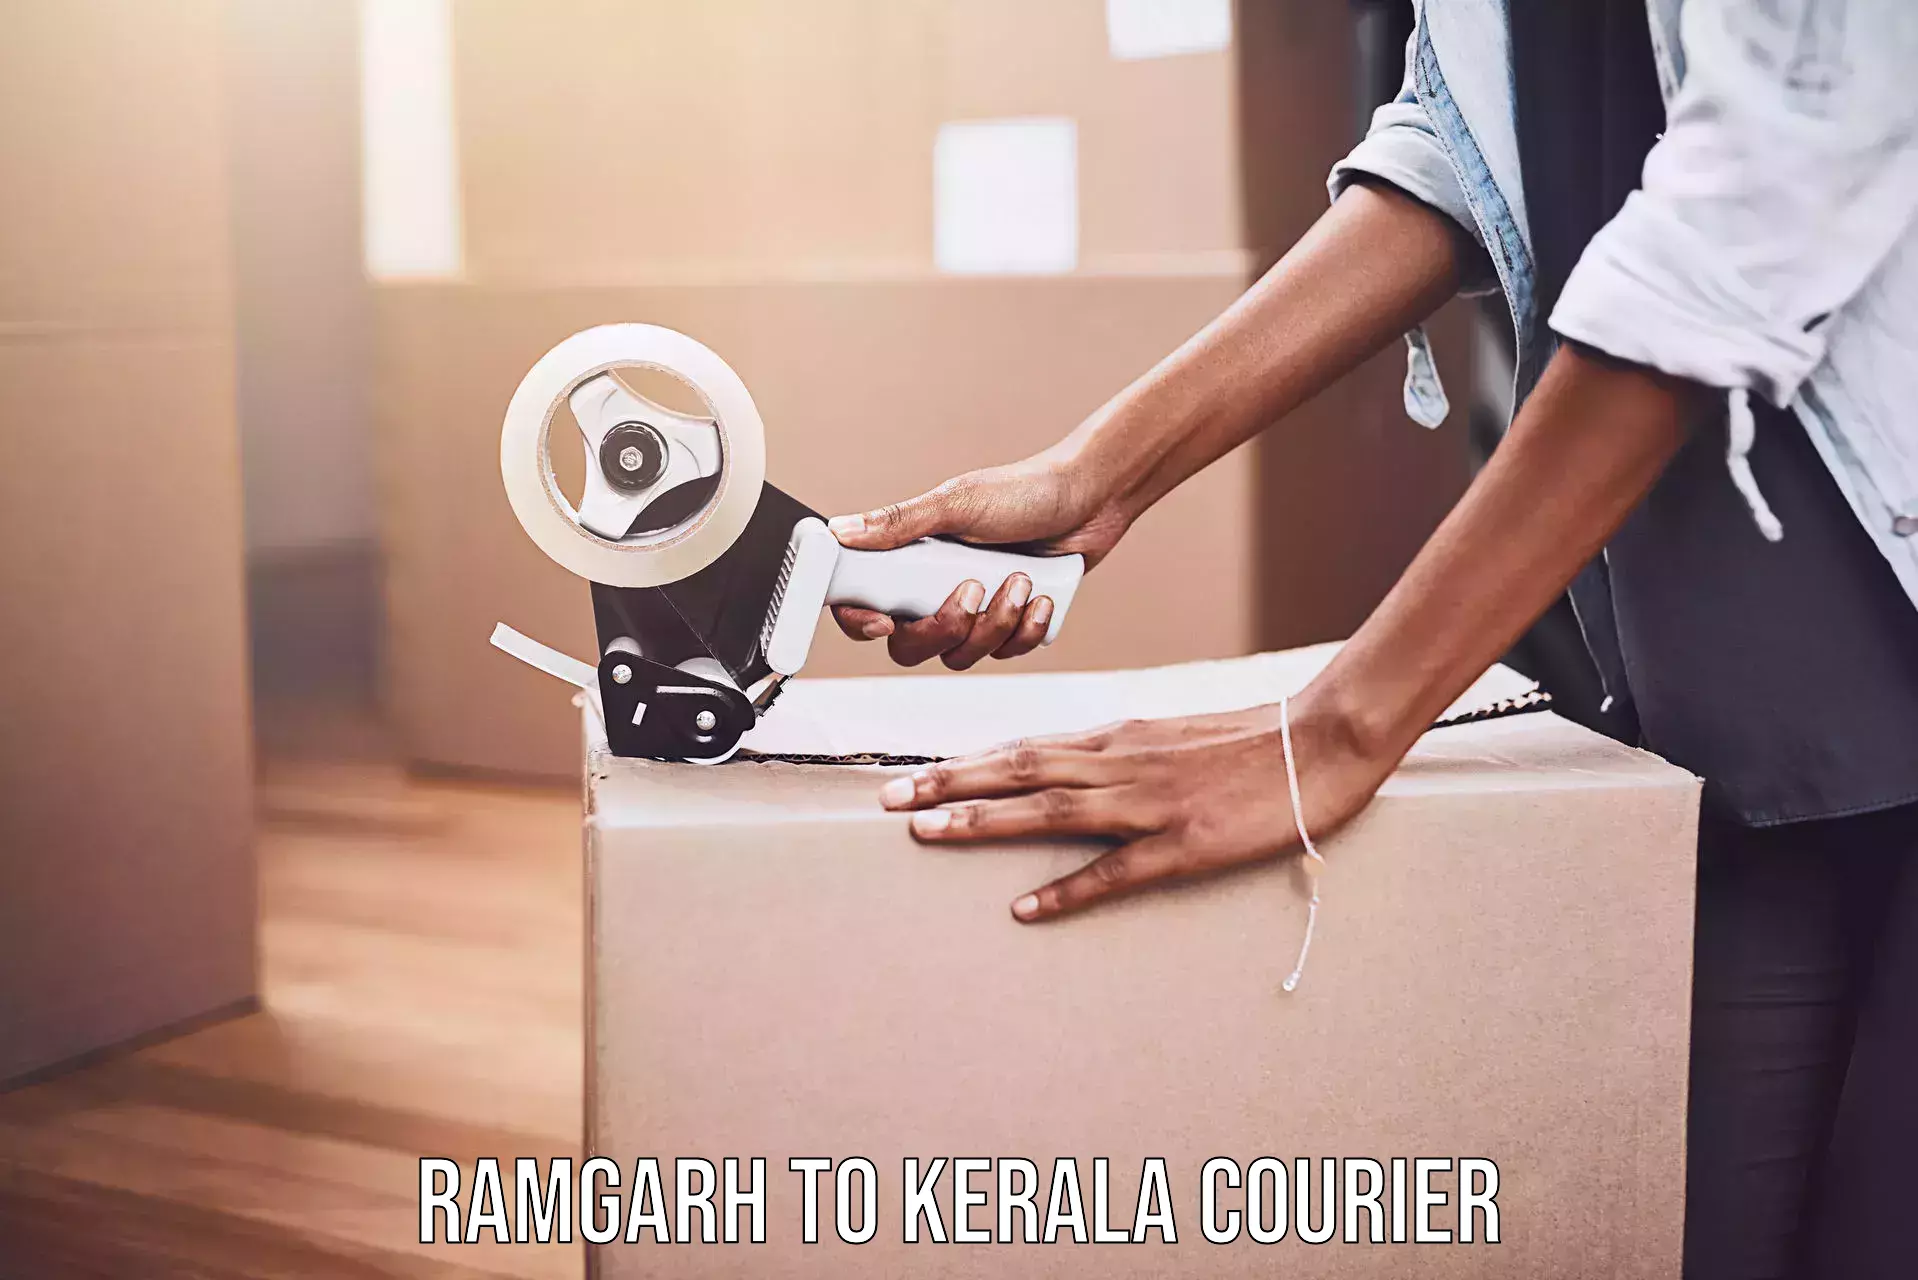 Global courier networks Ramgarh to Cochin Port Kochi